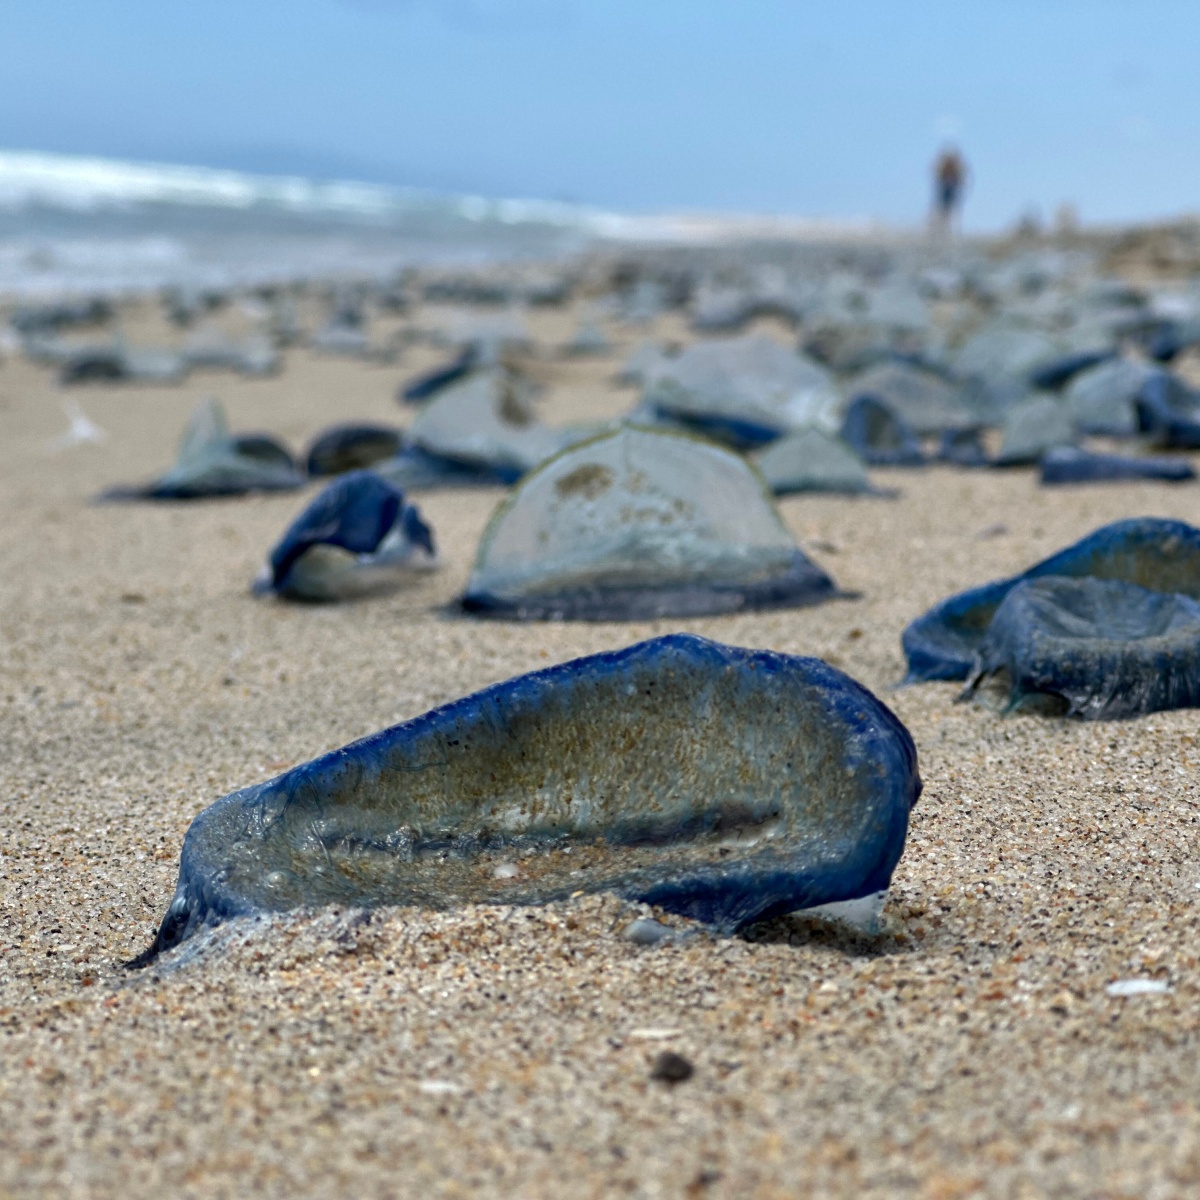 What are the Blue Sea Jelly-Things Washing up On California’s Beaches?